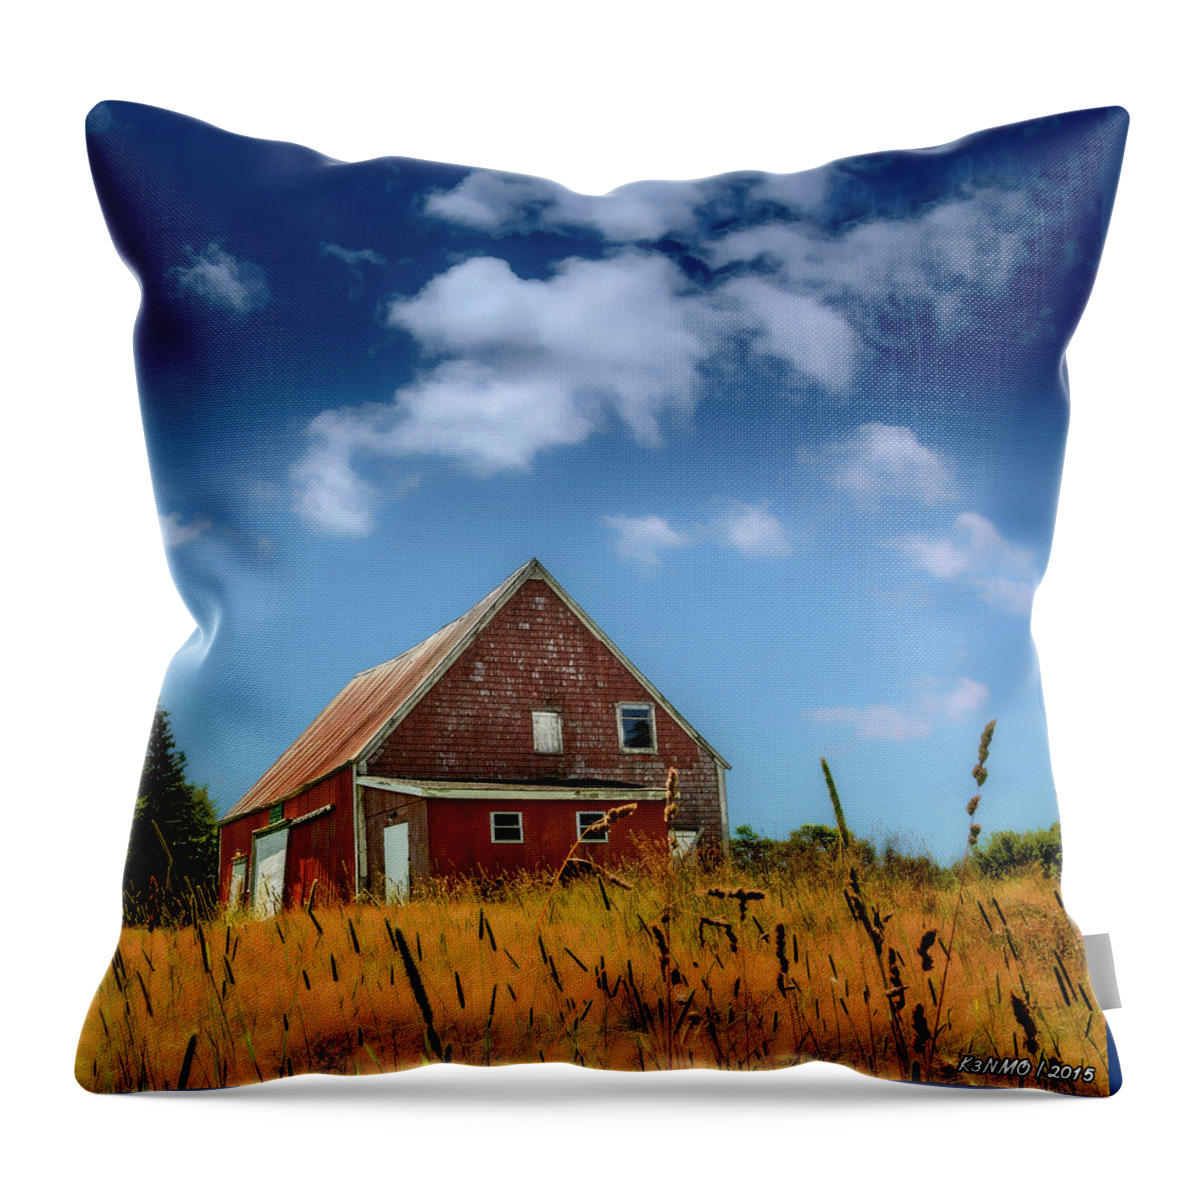 Abandoned Throw Pillow featuring the digital art Old Barn in Cape Breton by Ken Morris